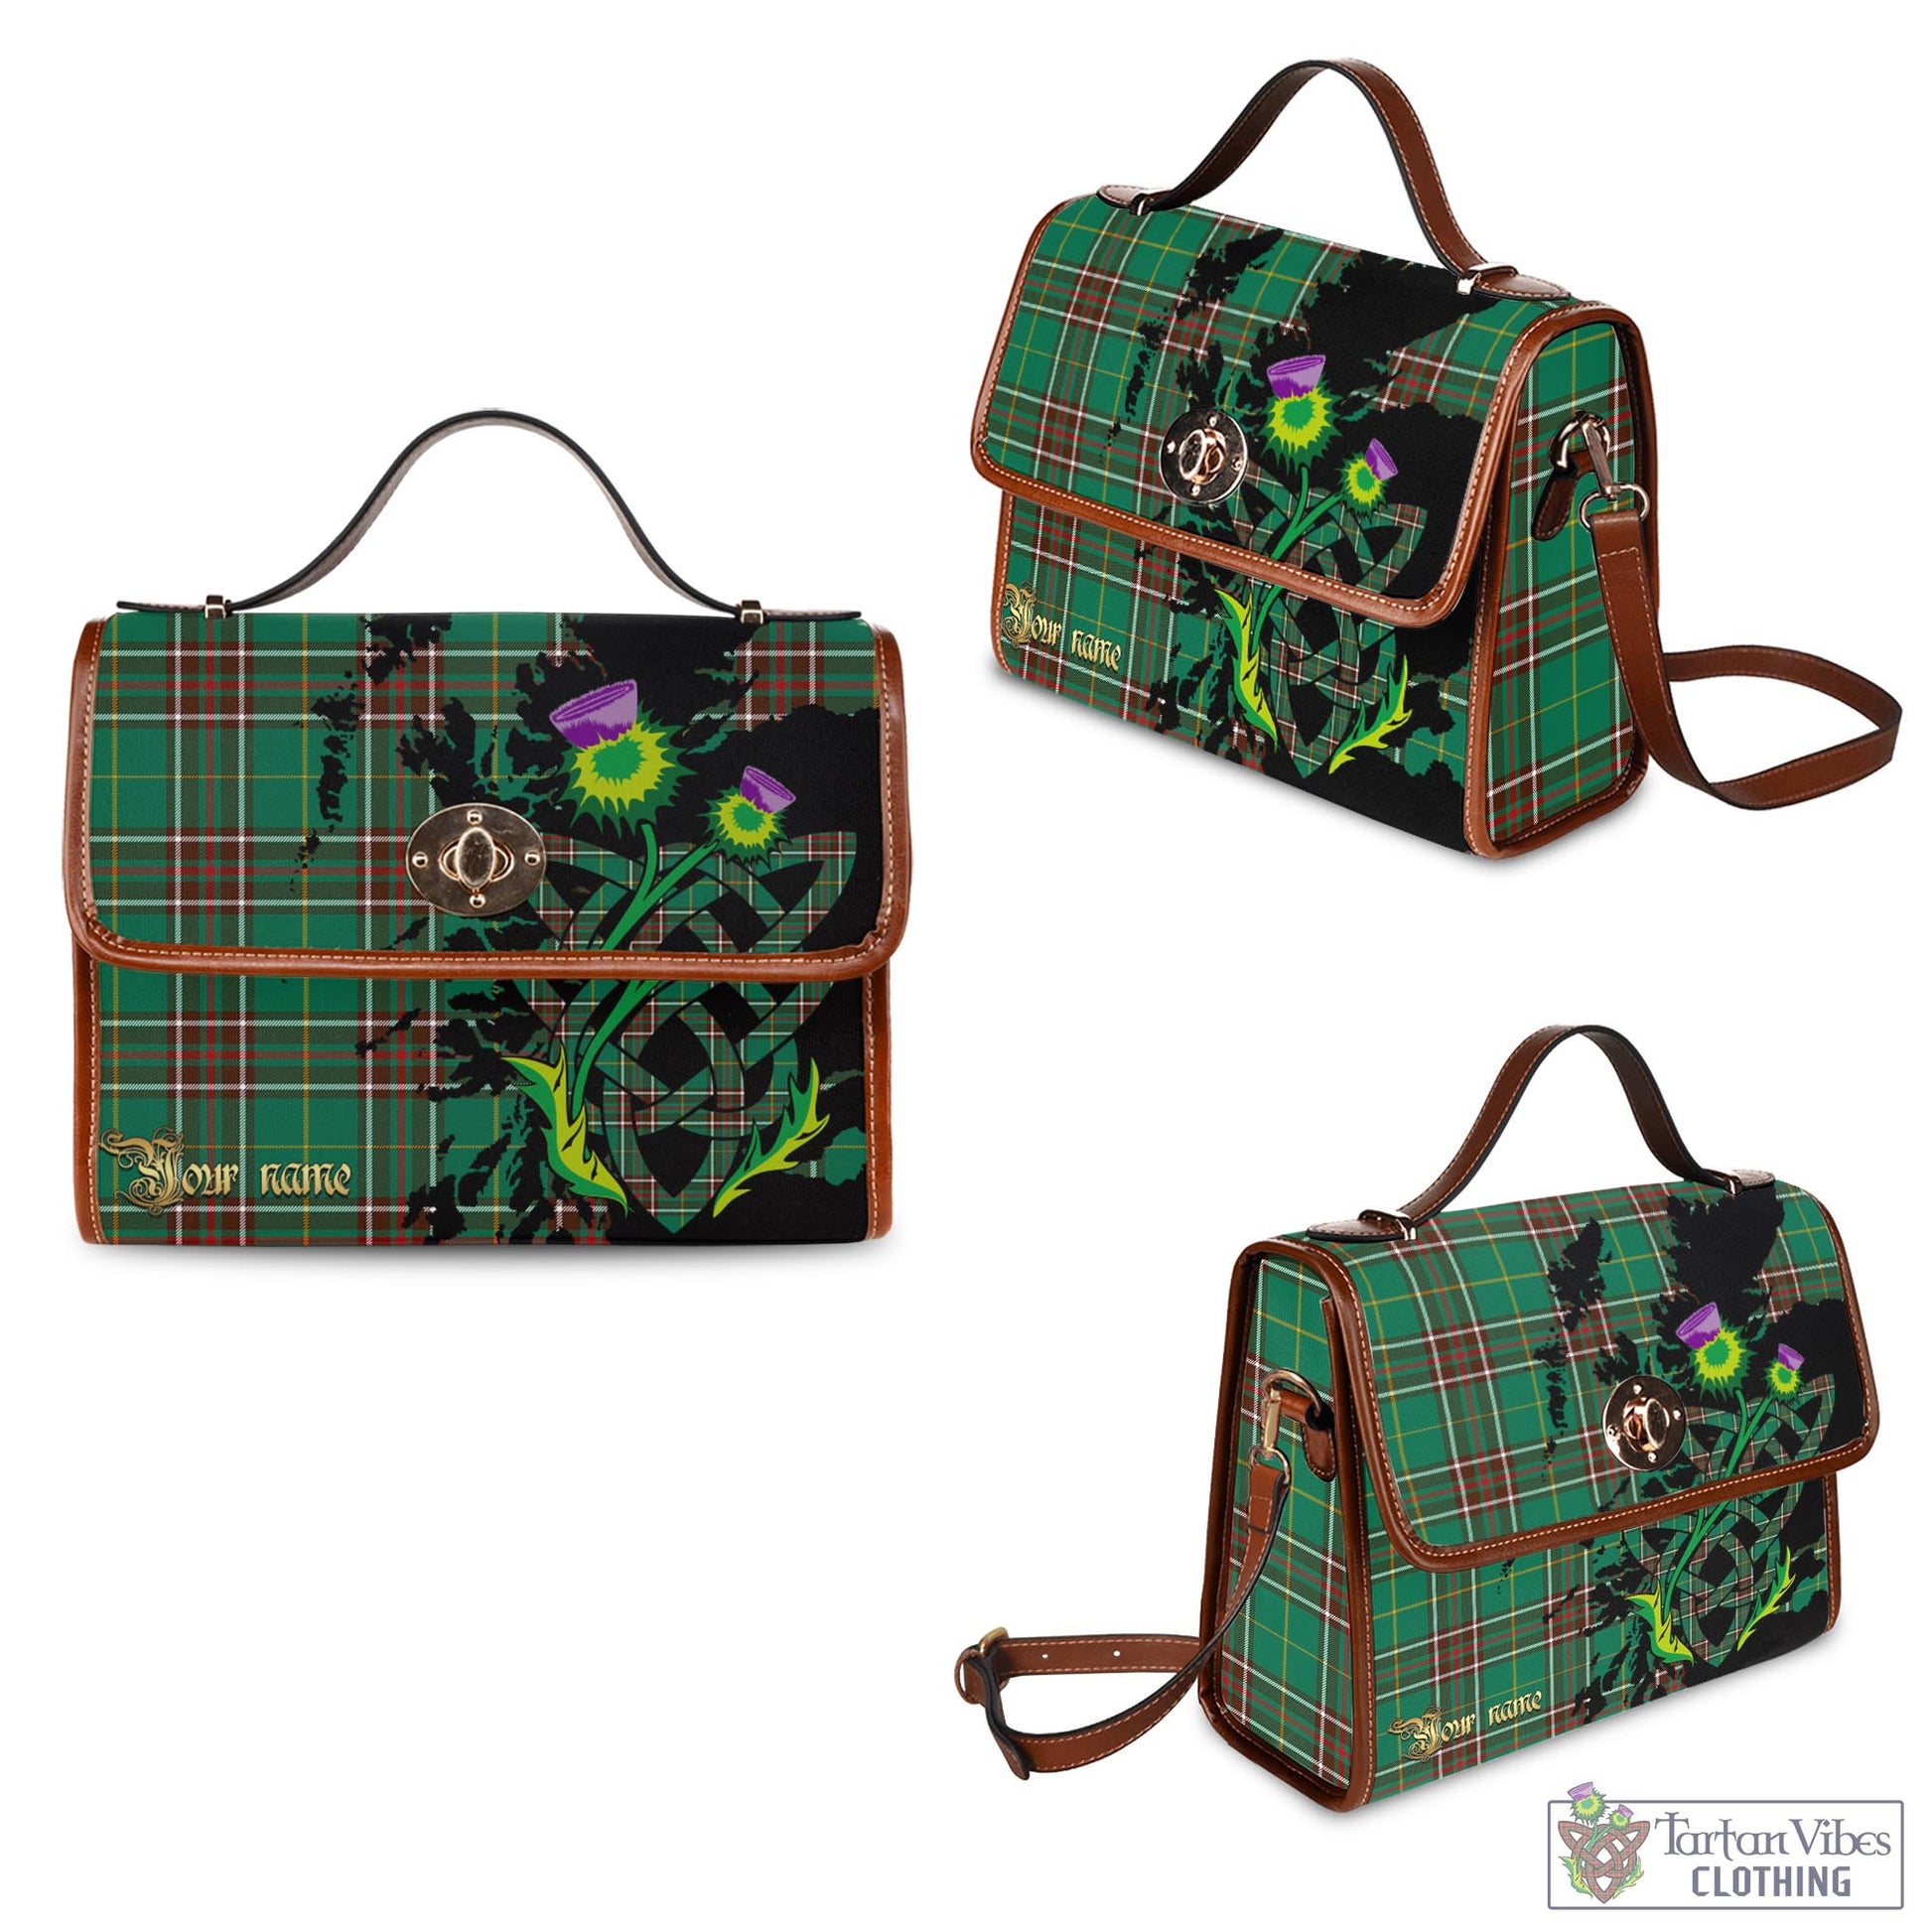 Tartan Vibes Clothing Newfoundland And Labrador Province Canada Tartan Waterproof Canvas Bag with Scotland Map and Thistle Celtic Accents